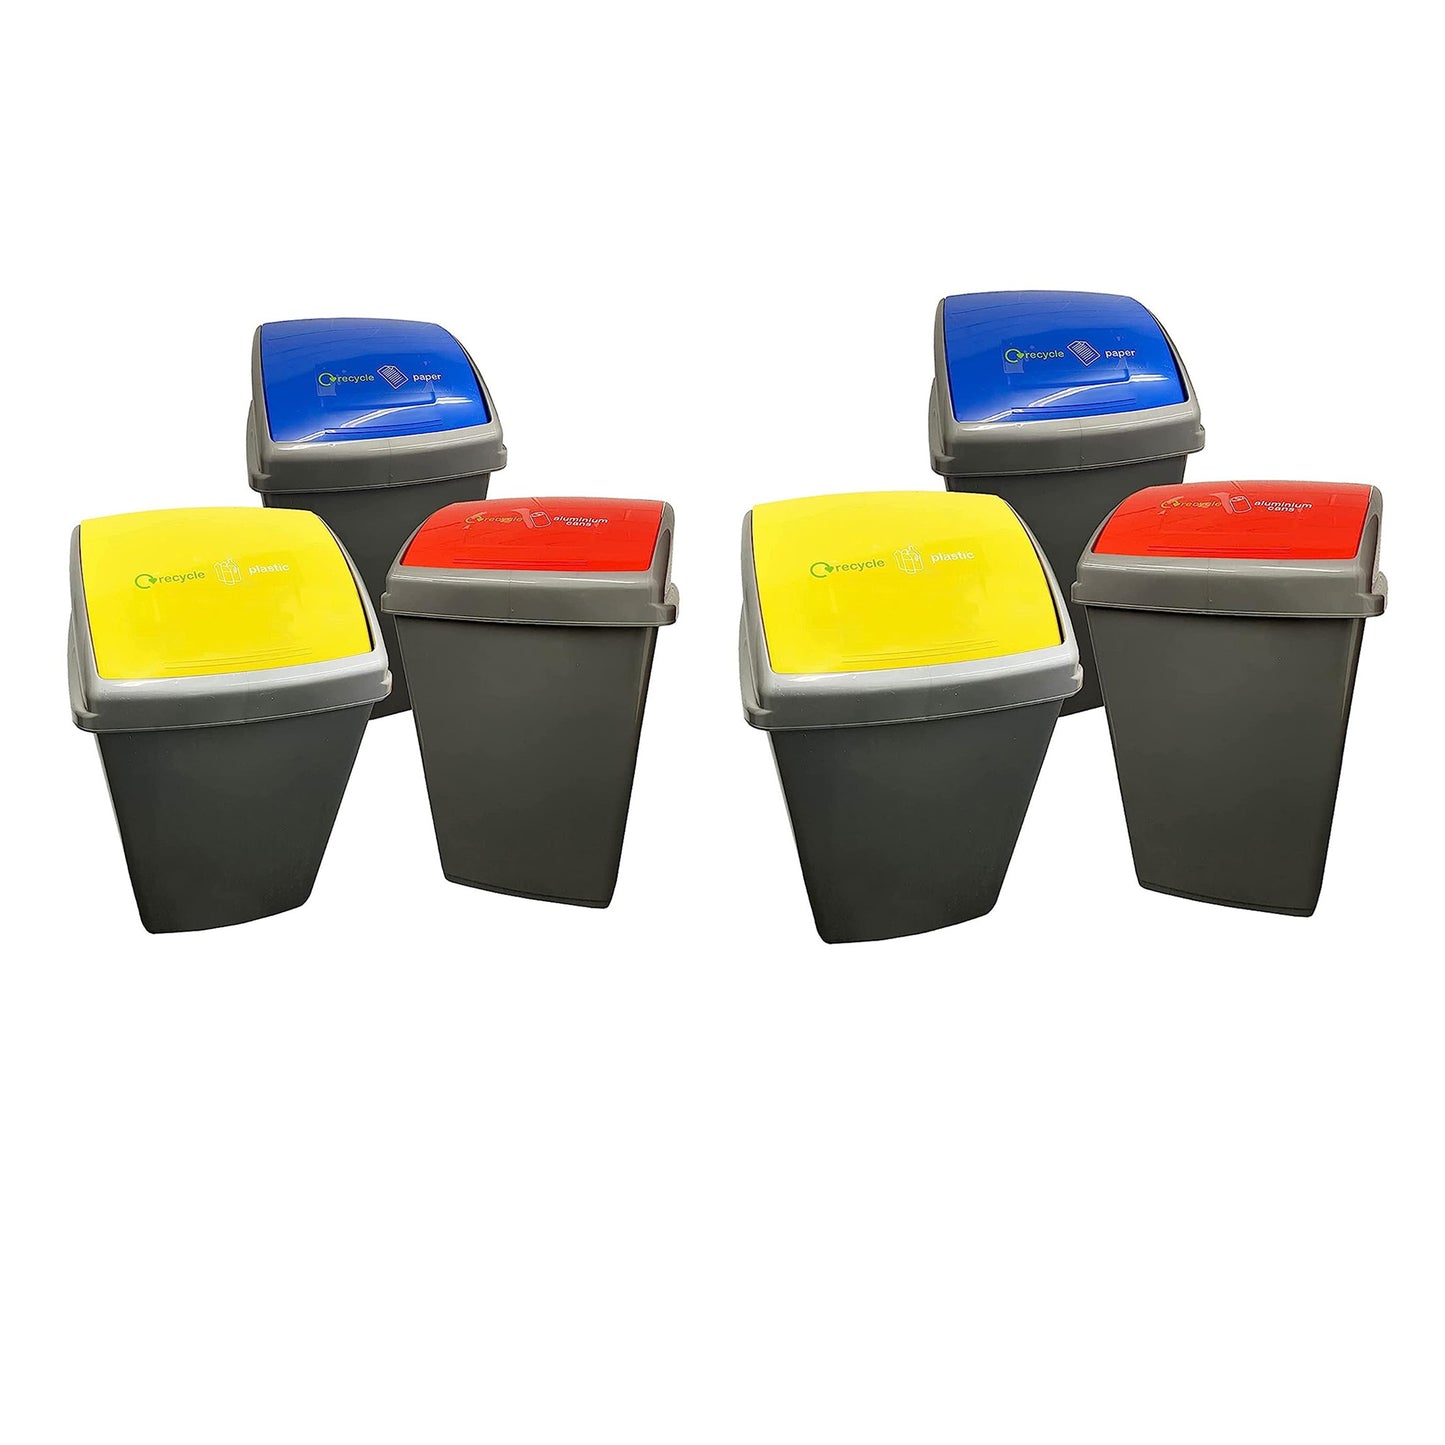 Grey 50 Litre Plastic Recycling Bins For Home & Office Complete With Colour Coded Lids